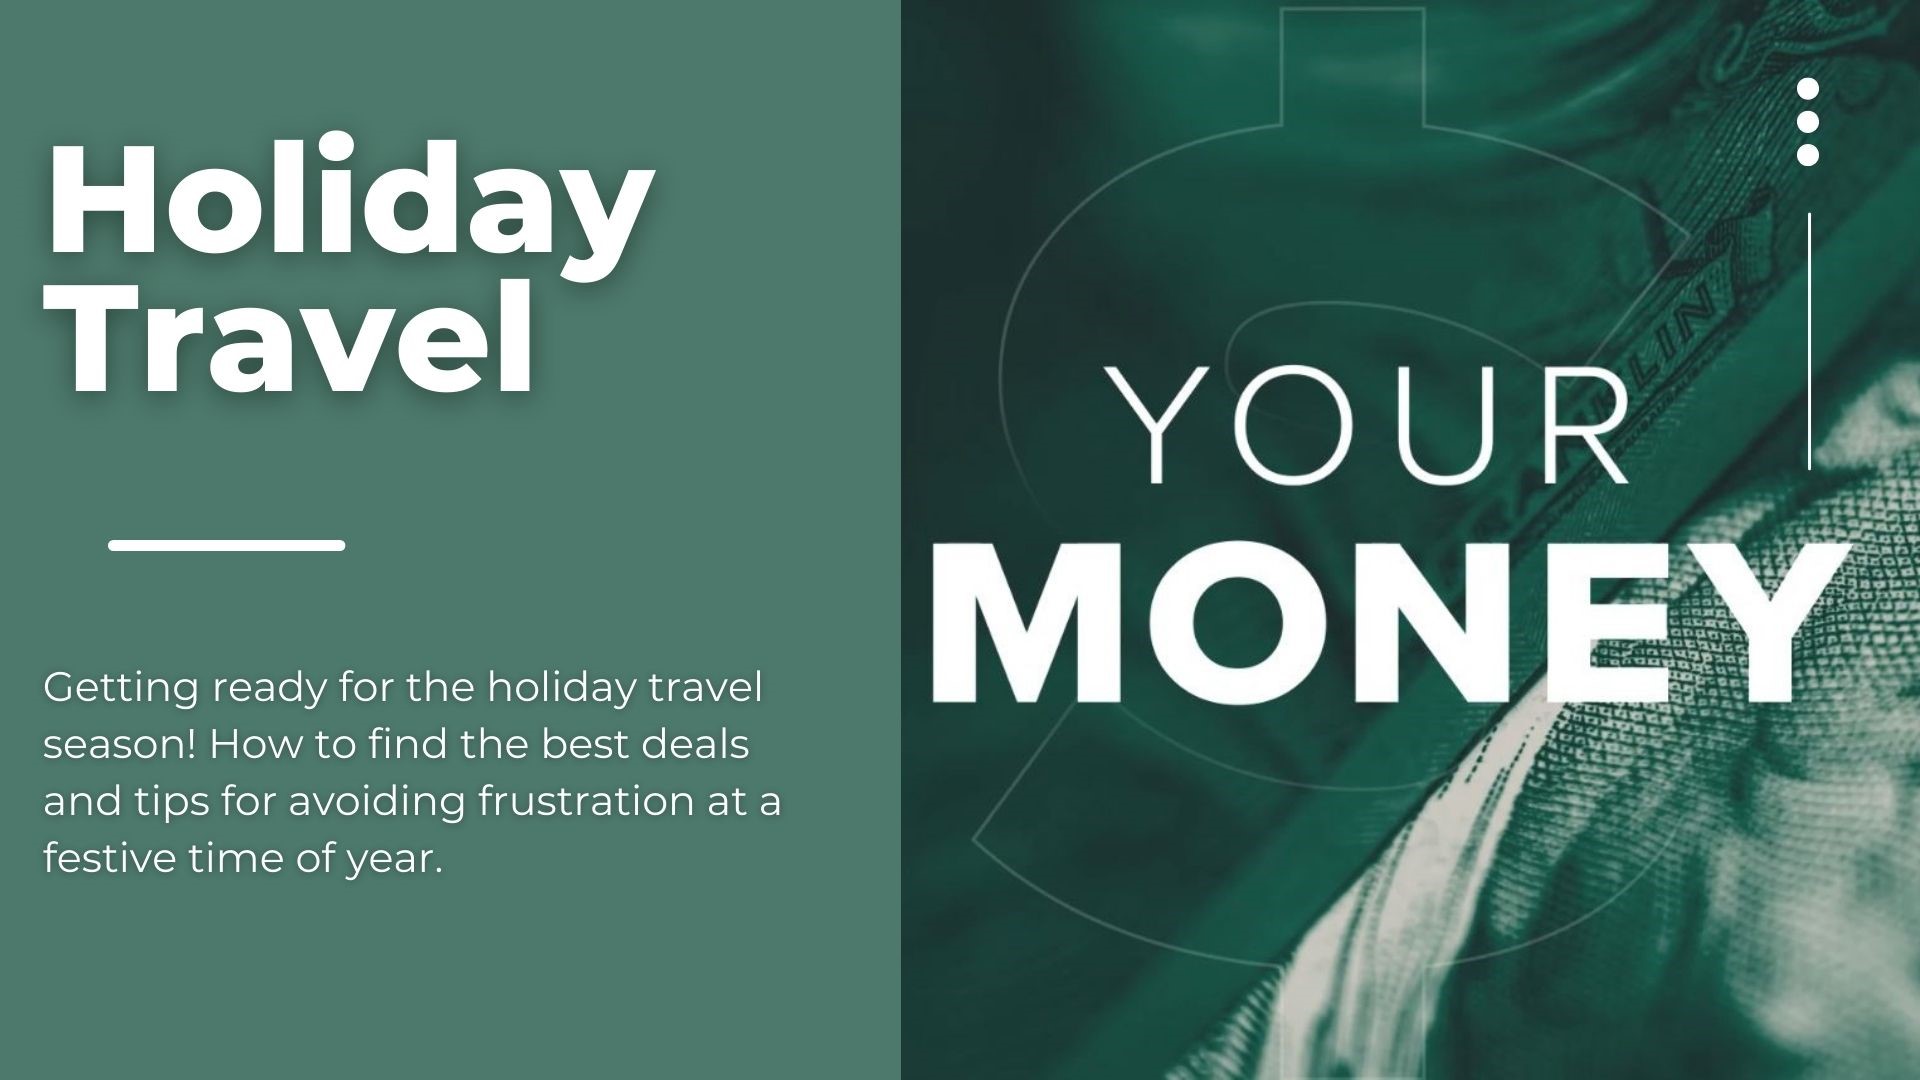 Getting ready for the holiday travel season! How to find the best deals and tips for avoiding frustration at a festive time of year.